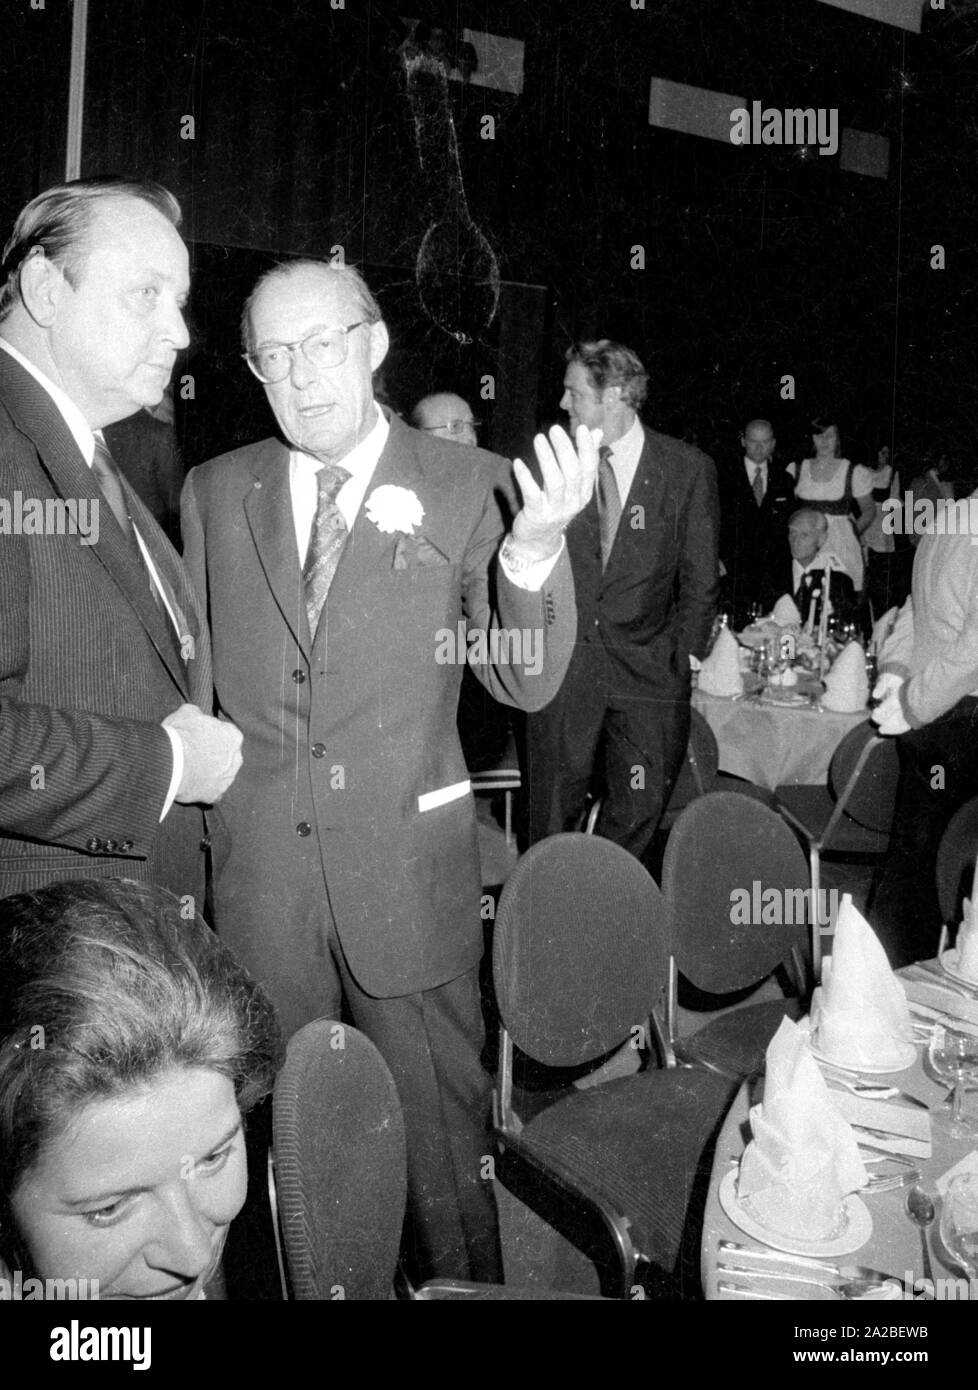 Hans-Dietrich Genscher (left) and the Dutch Prince Bernhard zur Lippe-Biesterfeld (r.) at the banquet of the Federal President in the Hilton Hotel in Munich. Stock Photo